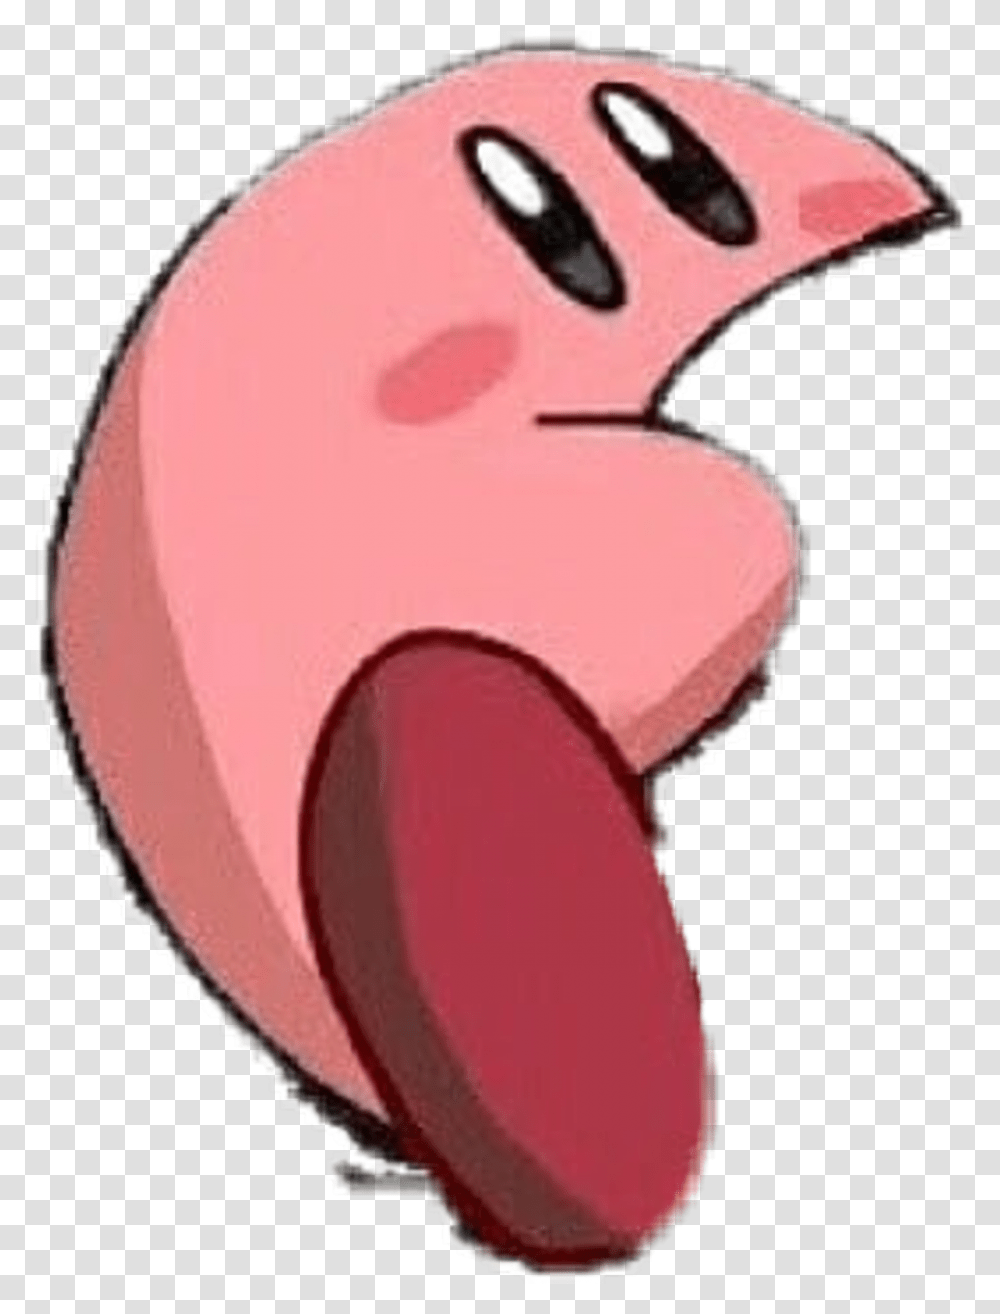 Download Kirby Sticker Kirby Memes, Mouth, Lip, Tongue, Helmet Transparent Png